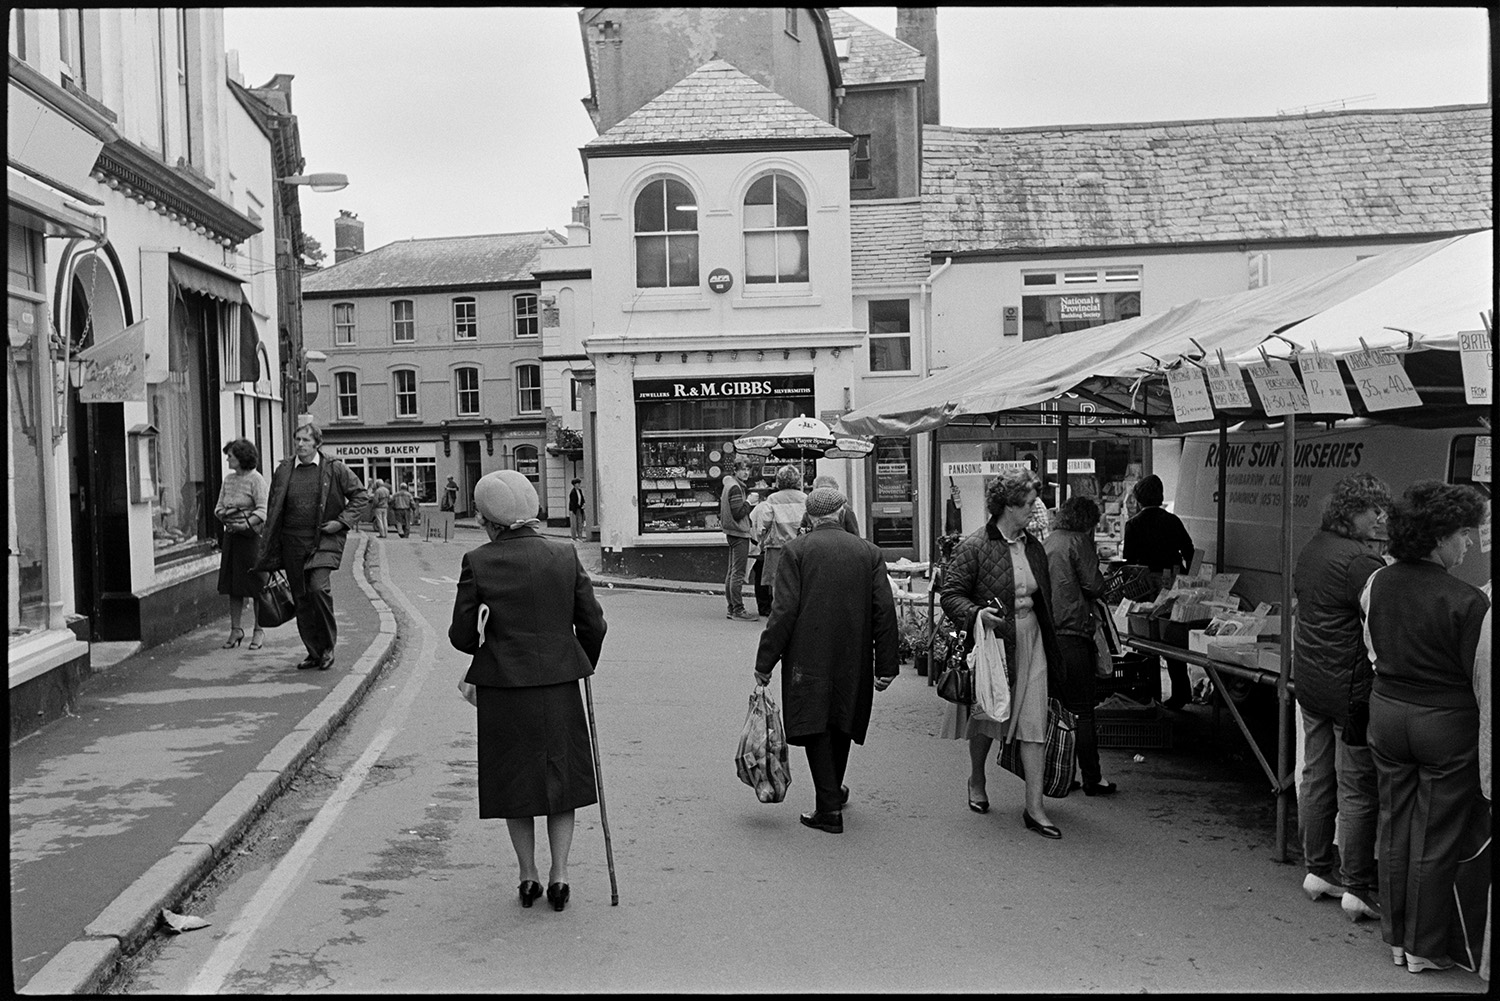 Town streets on market day clothes shop, people chatting. 
[Men and women shopping at market stalls in Holsworthy. Shop fronts are visible in the background including Headons Bakery and R&M Gibbs.]